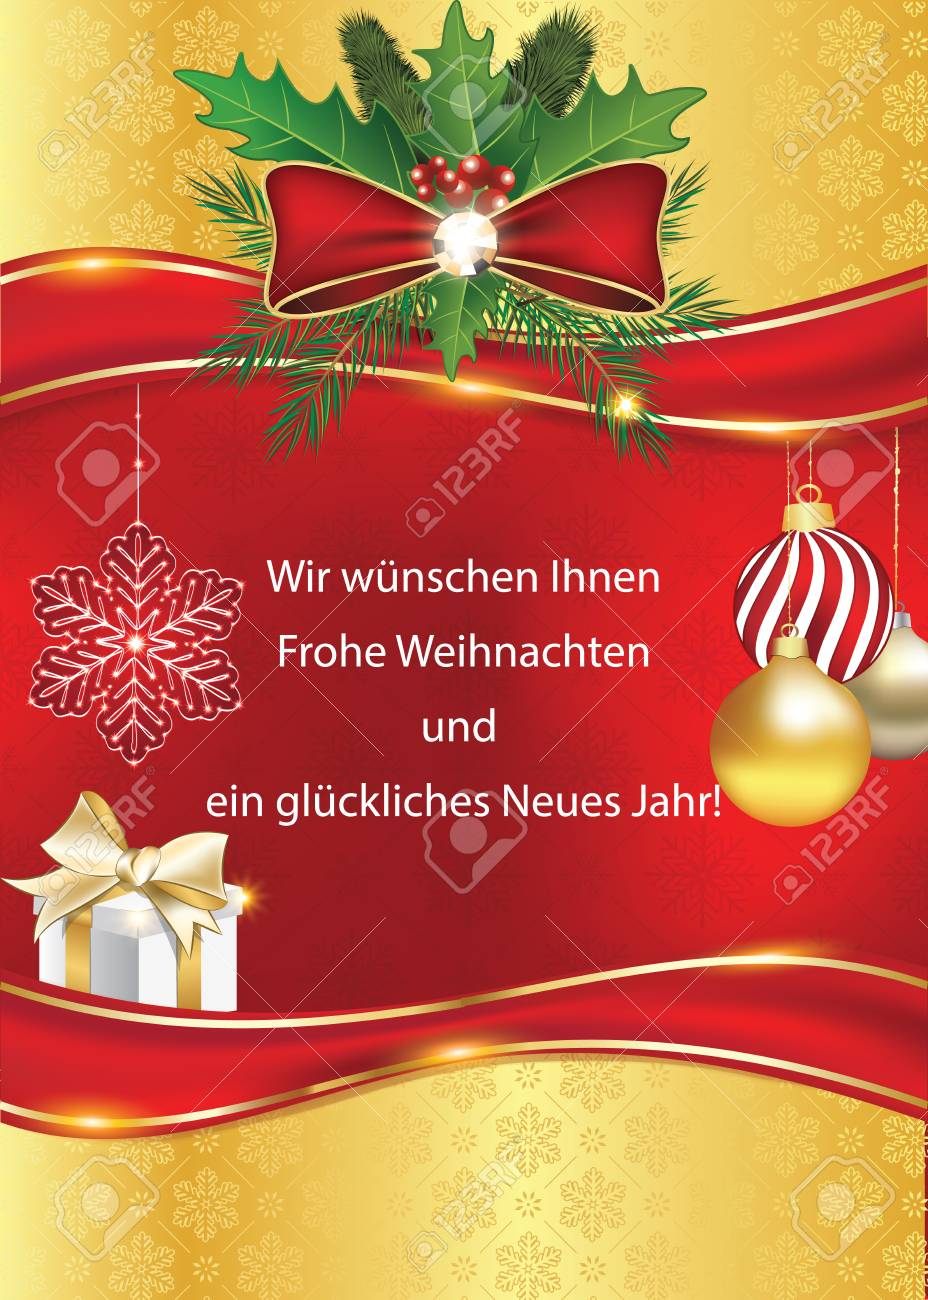 Greeting Card For The Year With Text In German Language: We Wish - Free Printable German Christmas Cards